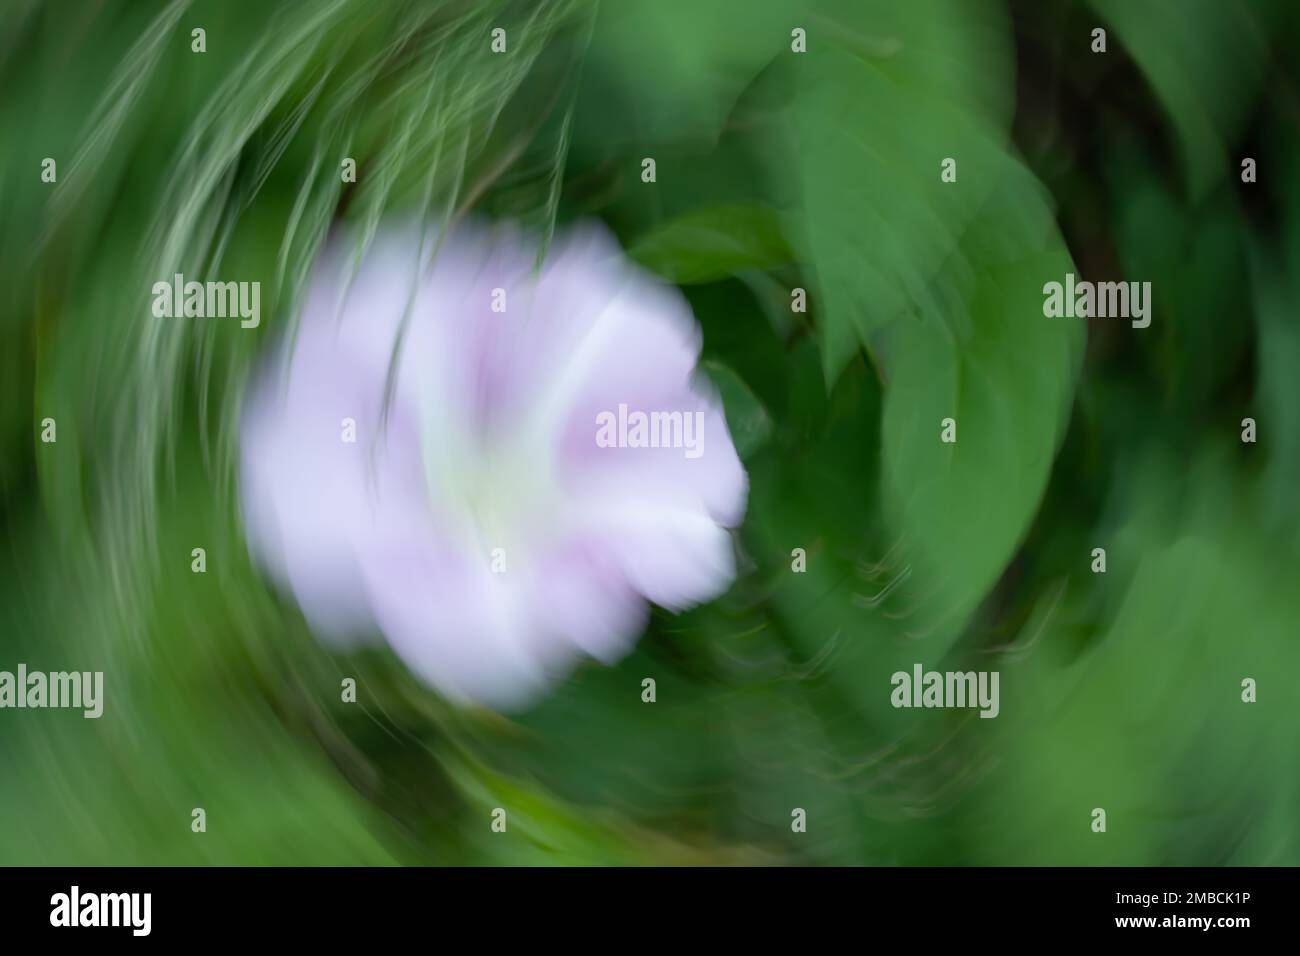 Morning glory impressionist abstract background blues and green Stock Photo